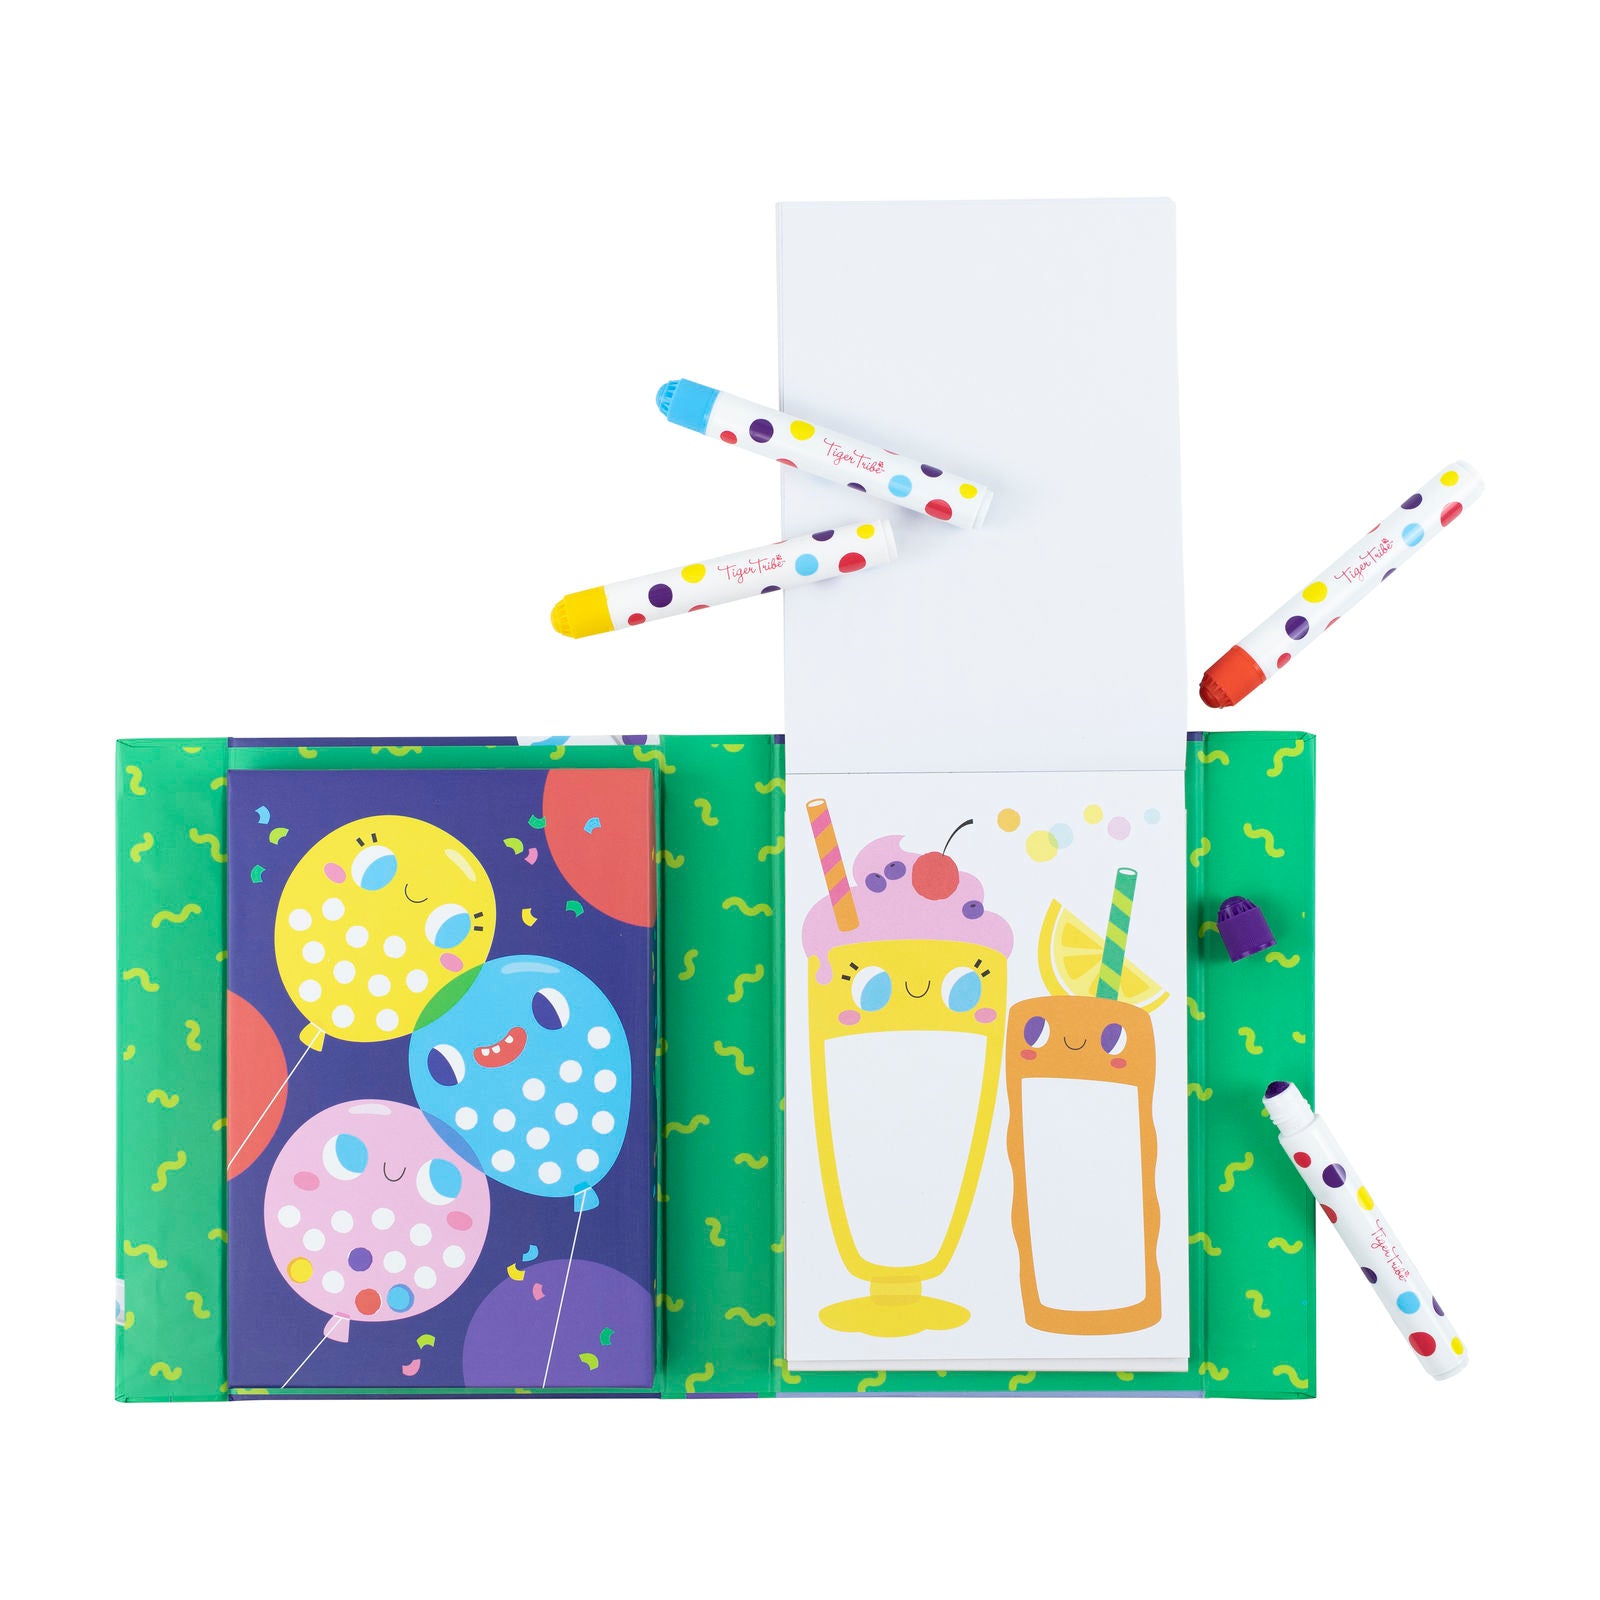 Tiger Tribe Dot Paint Set – Party Time